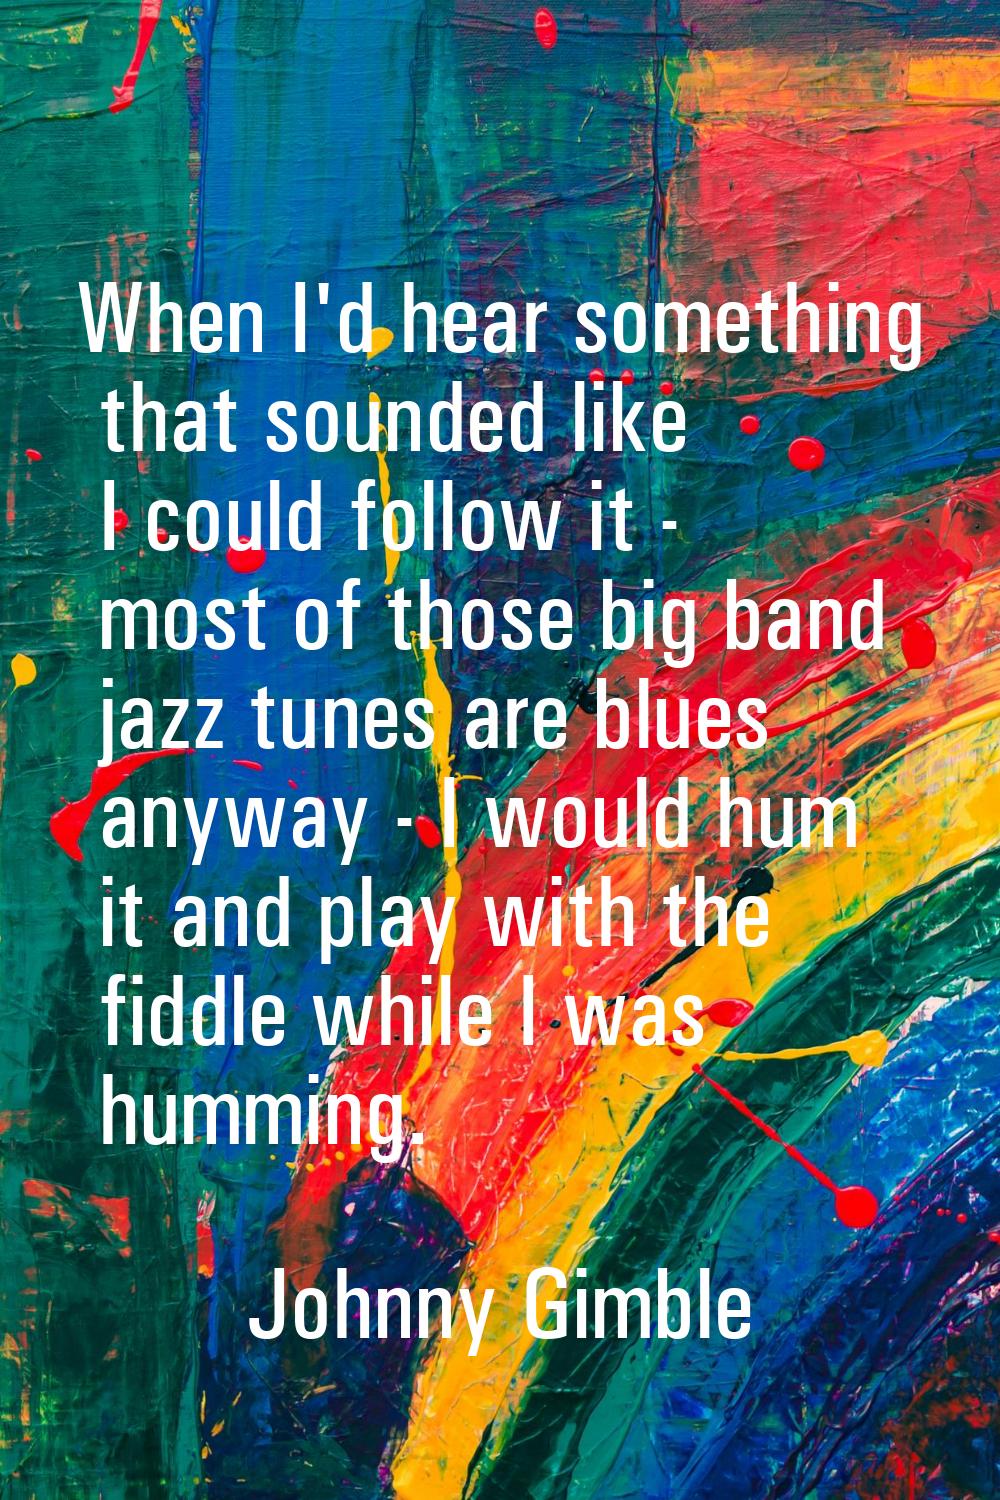 When I'd hear something that sounded like I could follow it - most of those big band jazz tunes are